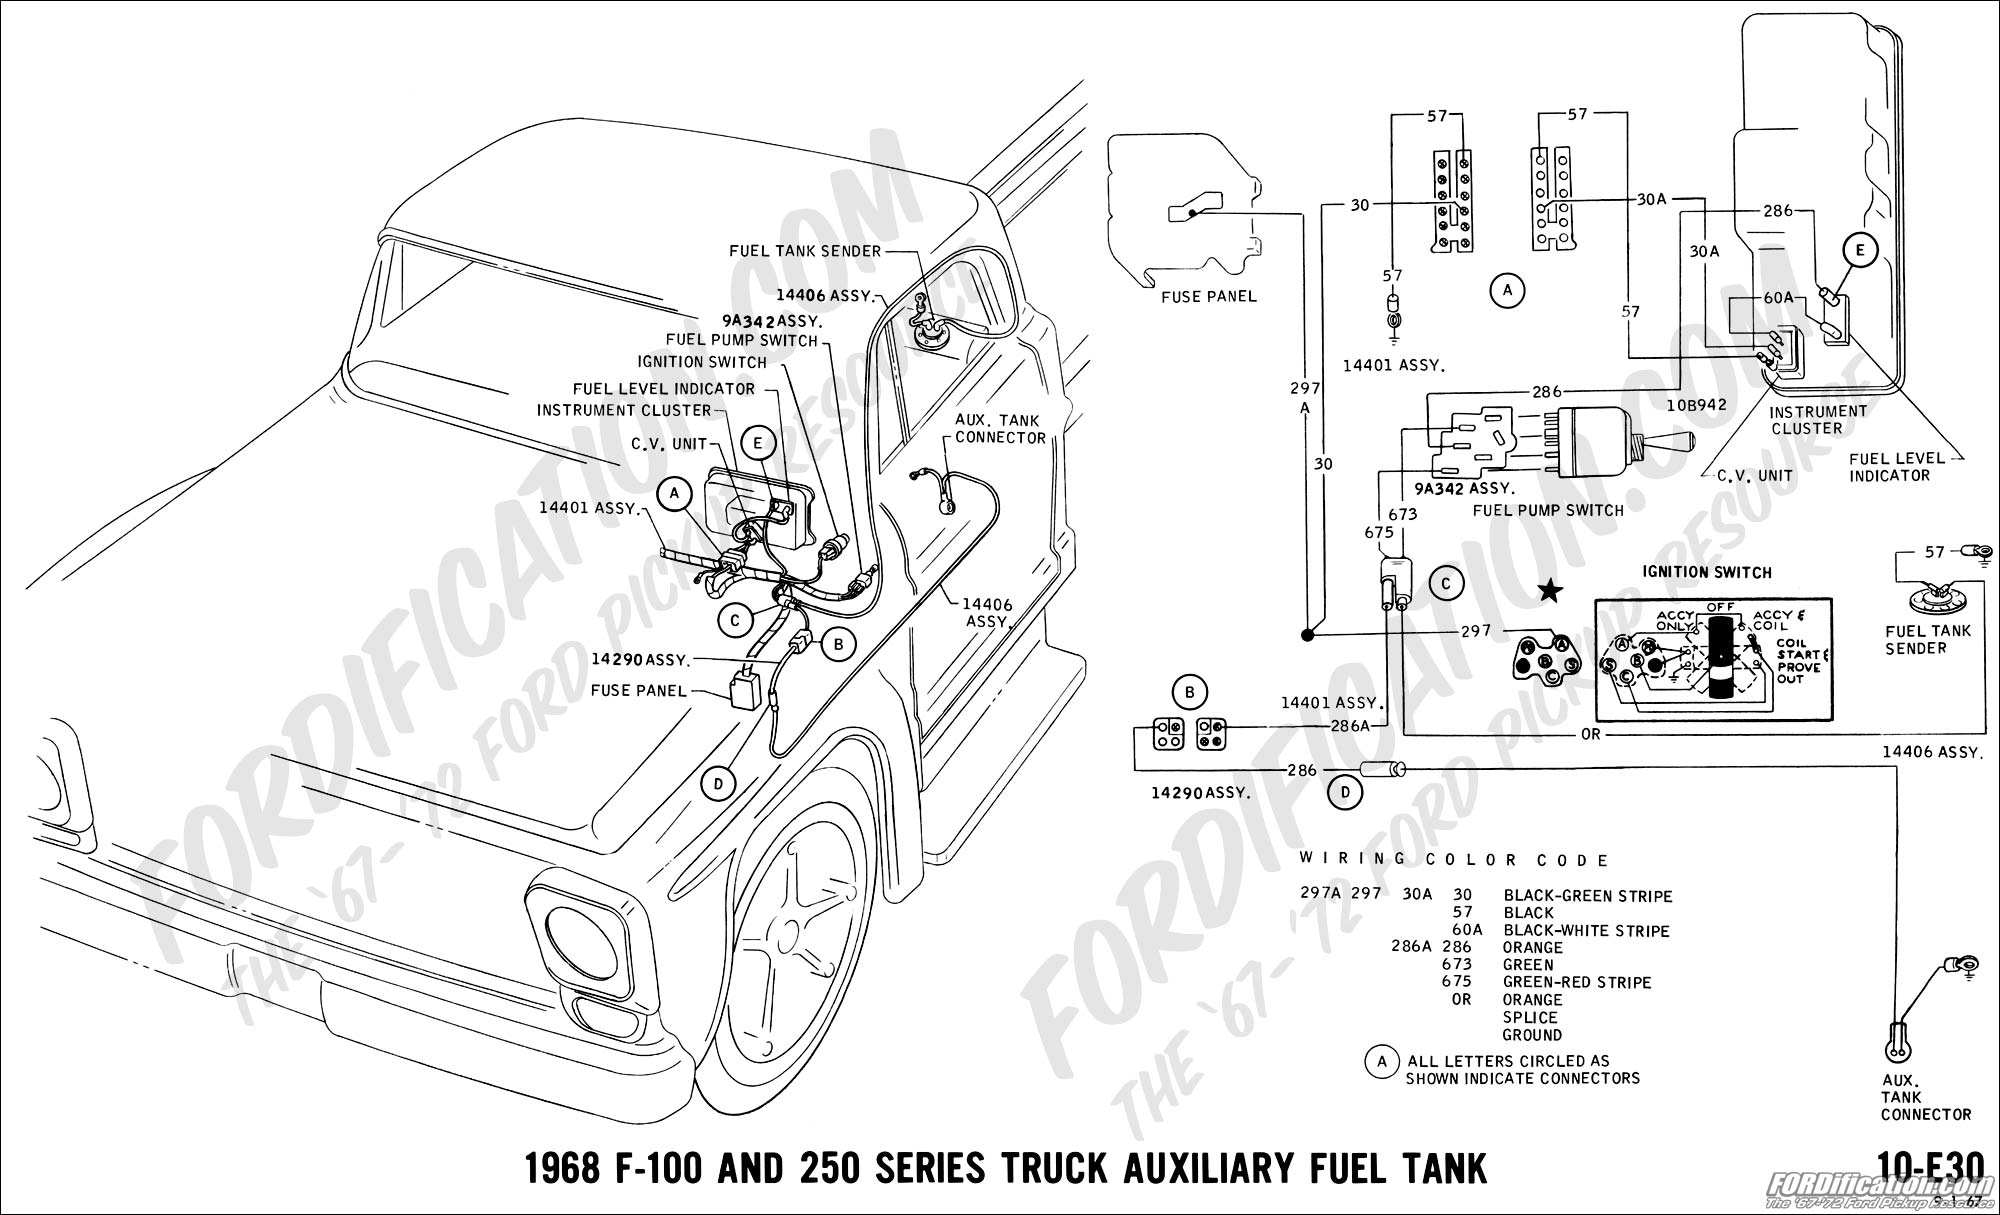 Fuel Tank Selector Switch Wiring Diagram from fordification.com